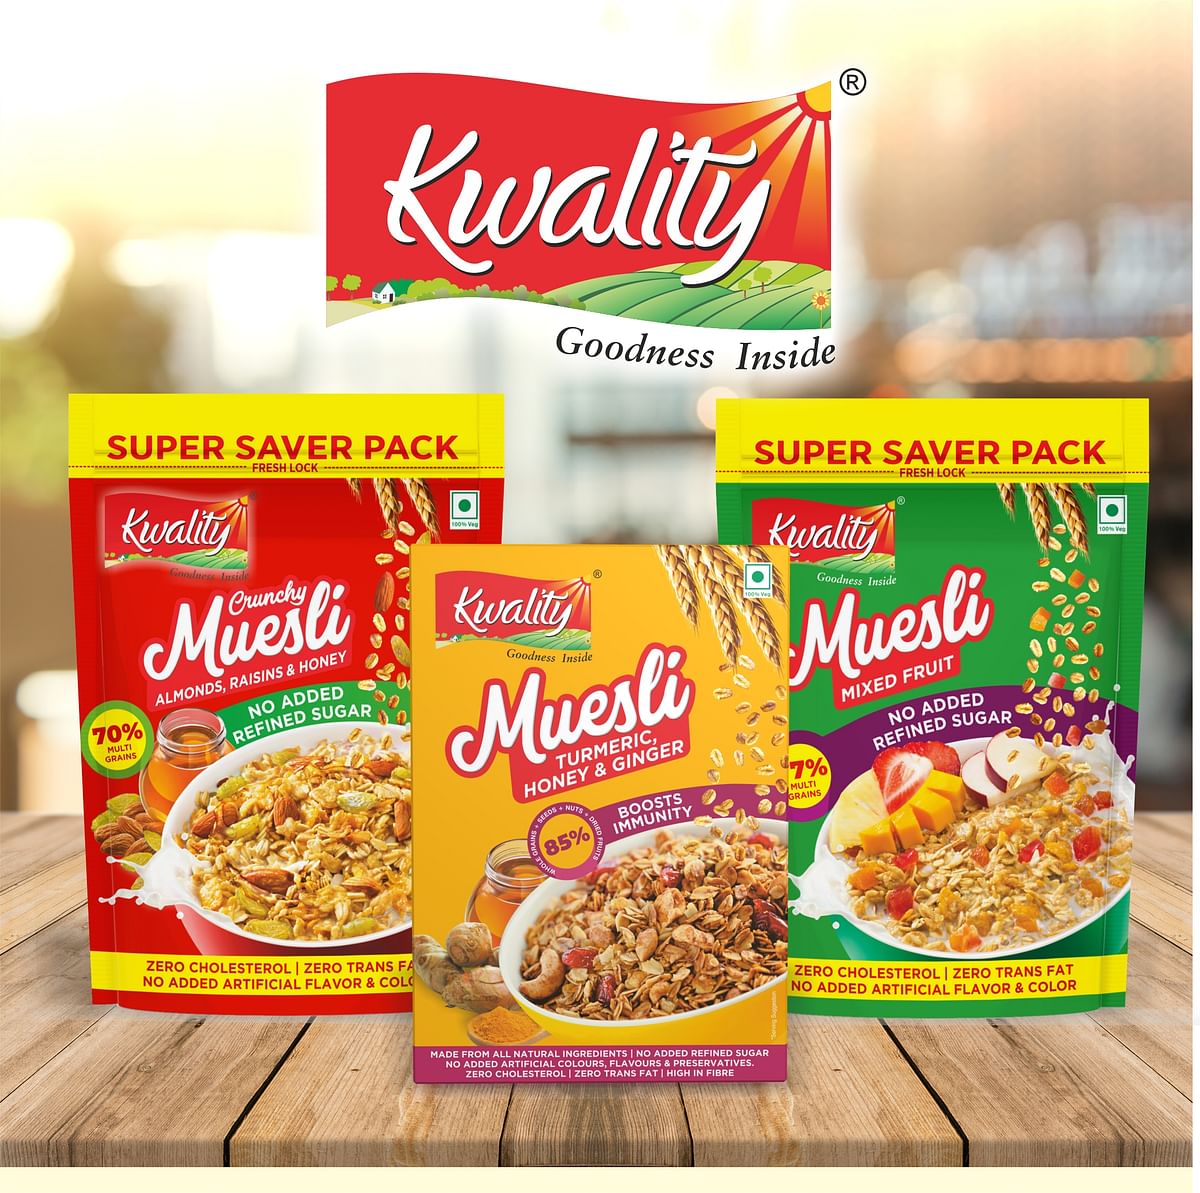 Kwality Foods has introduced muesli with turmeric, honey, and ginger